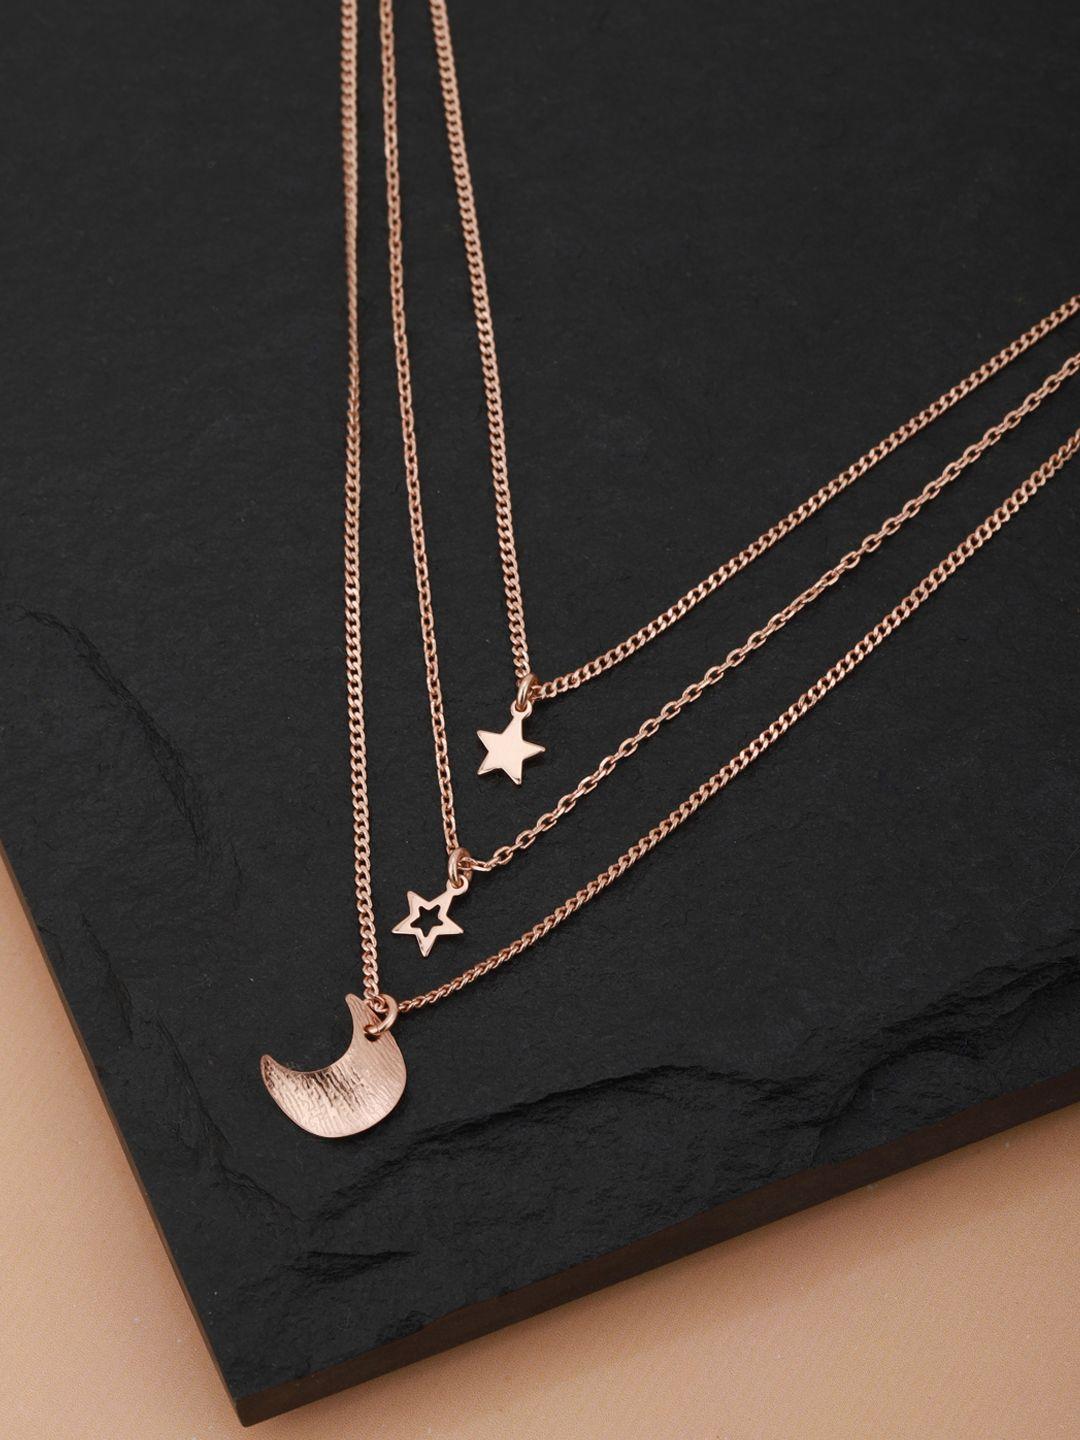 carlton london rose gold-plated layered necklace